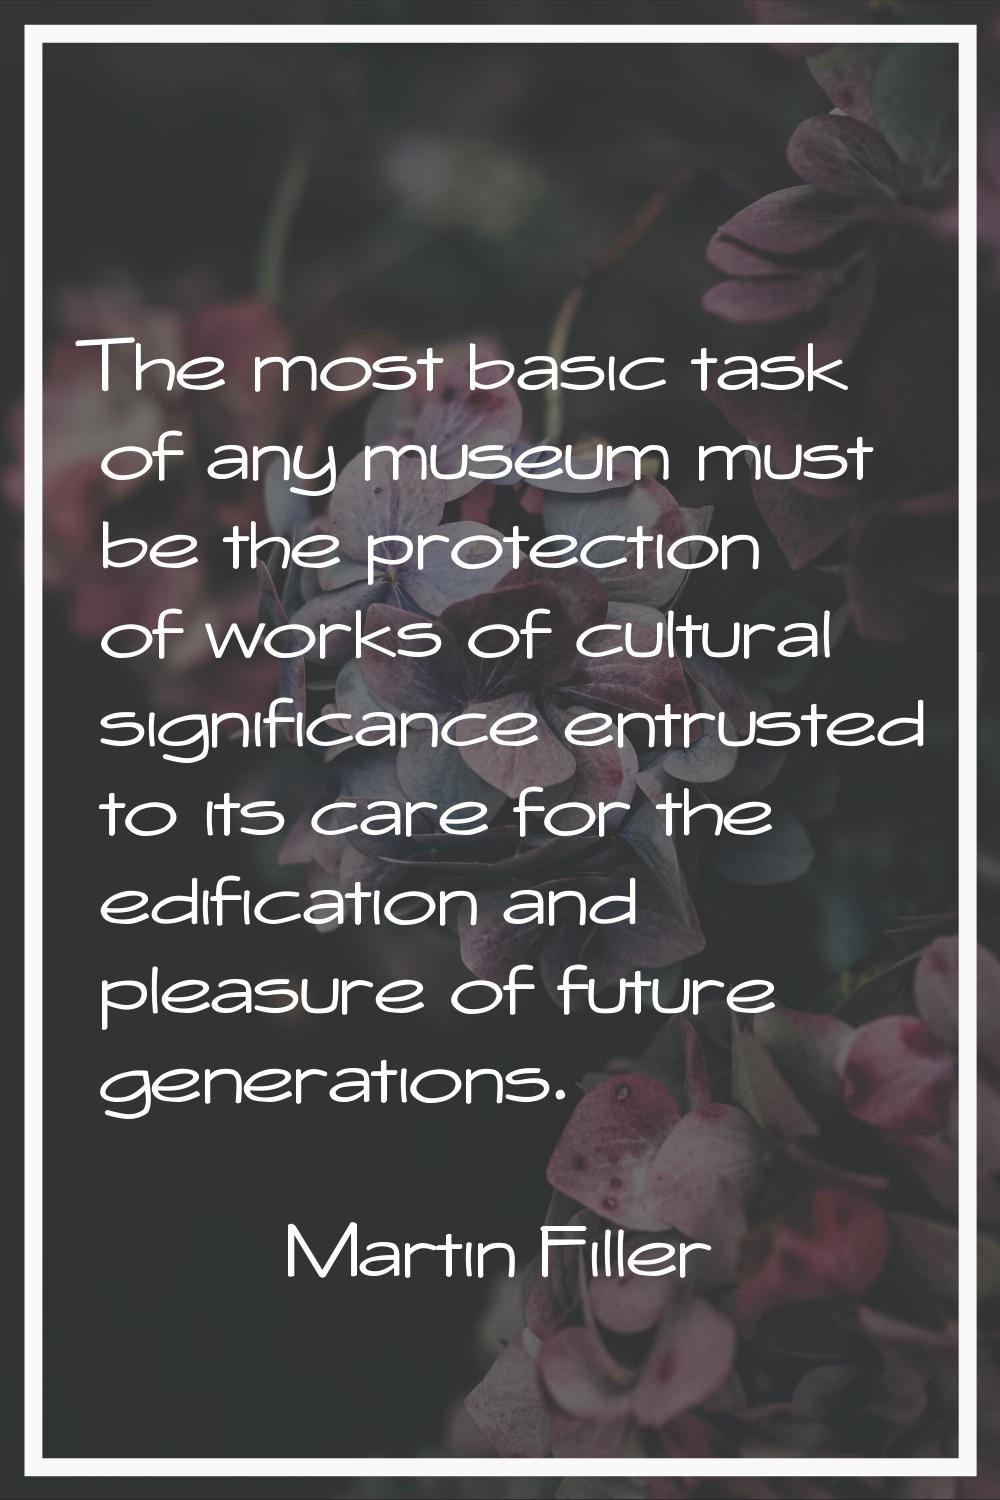 The most basic task of any museum must be the protection of works of cultural significance entruste